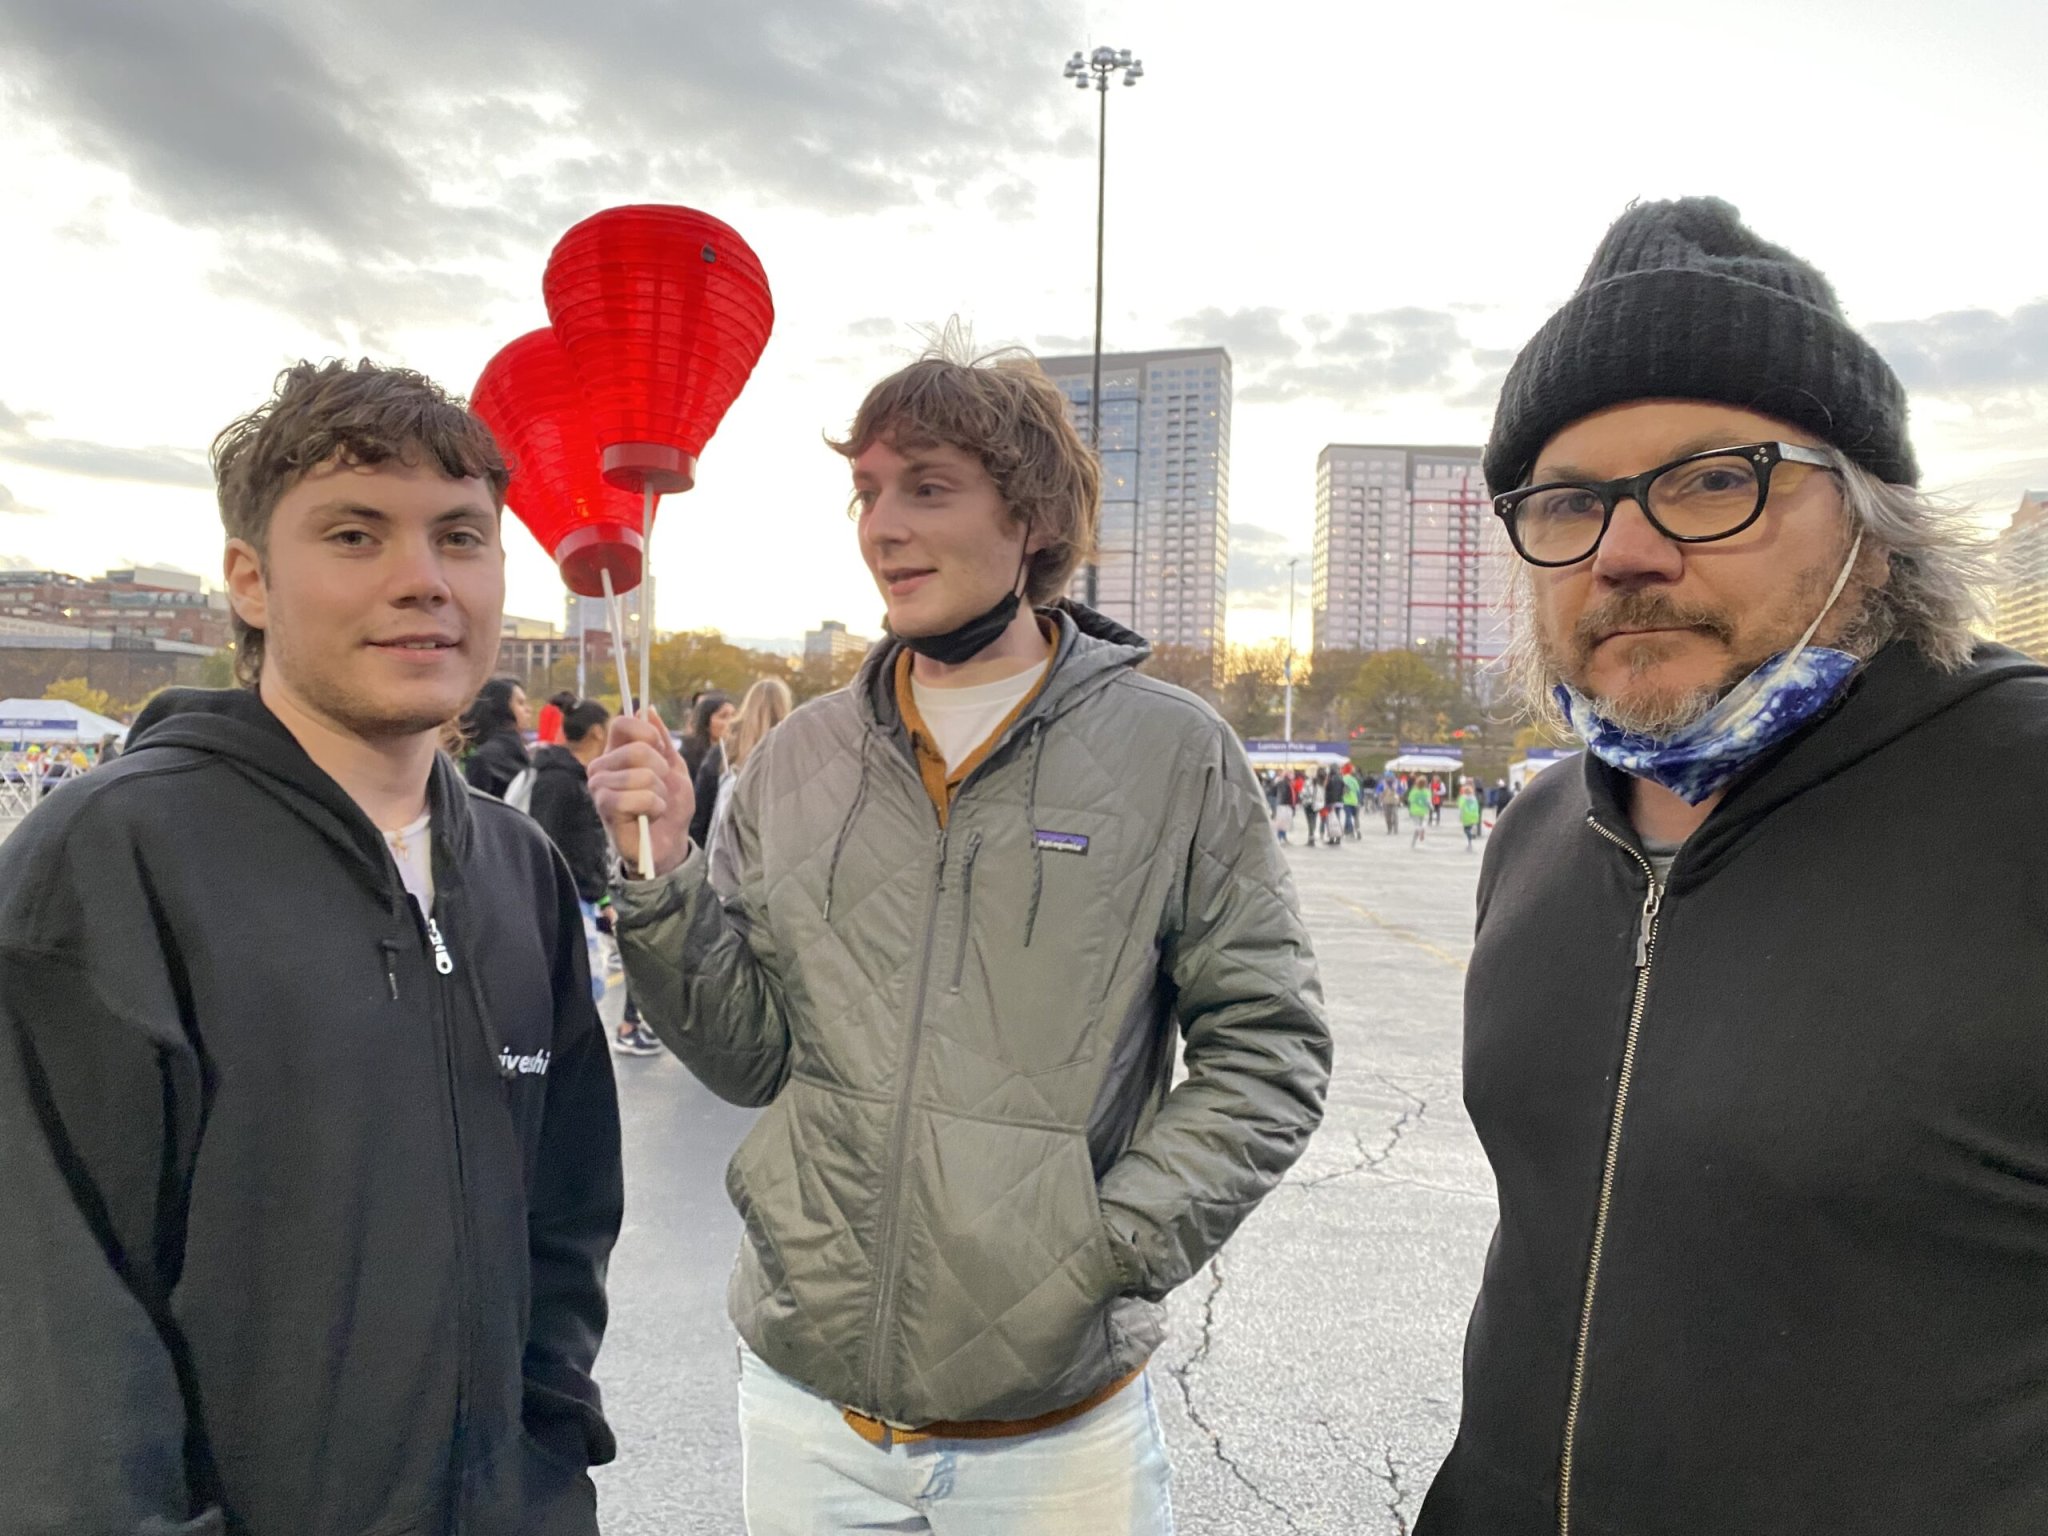 Jeff Tweedy and His Sons Are the New Kings of 'Dad Rock' — And They Couldn't Be Happier